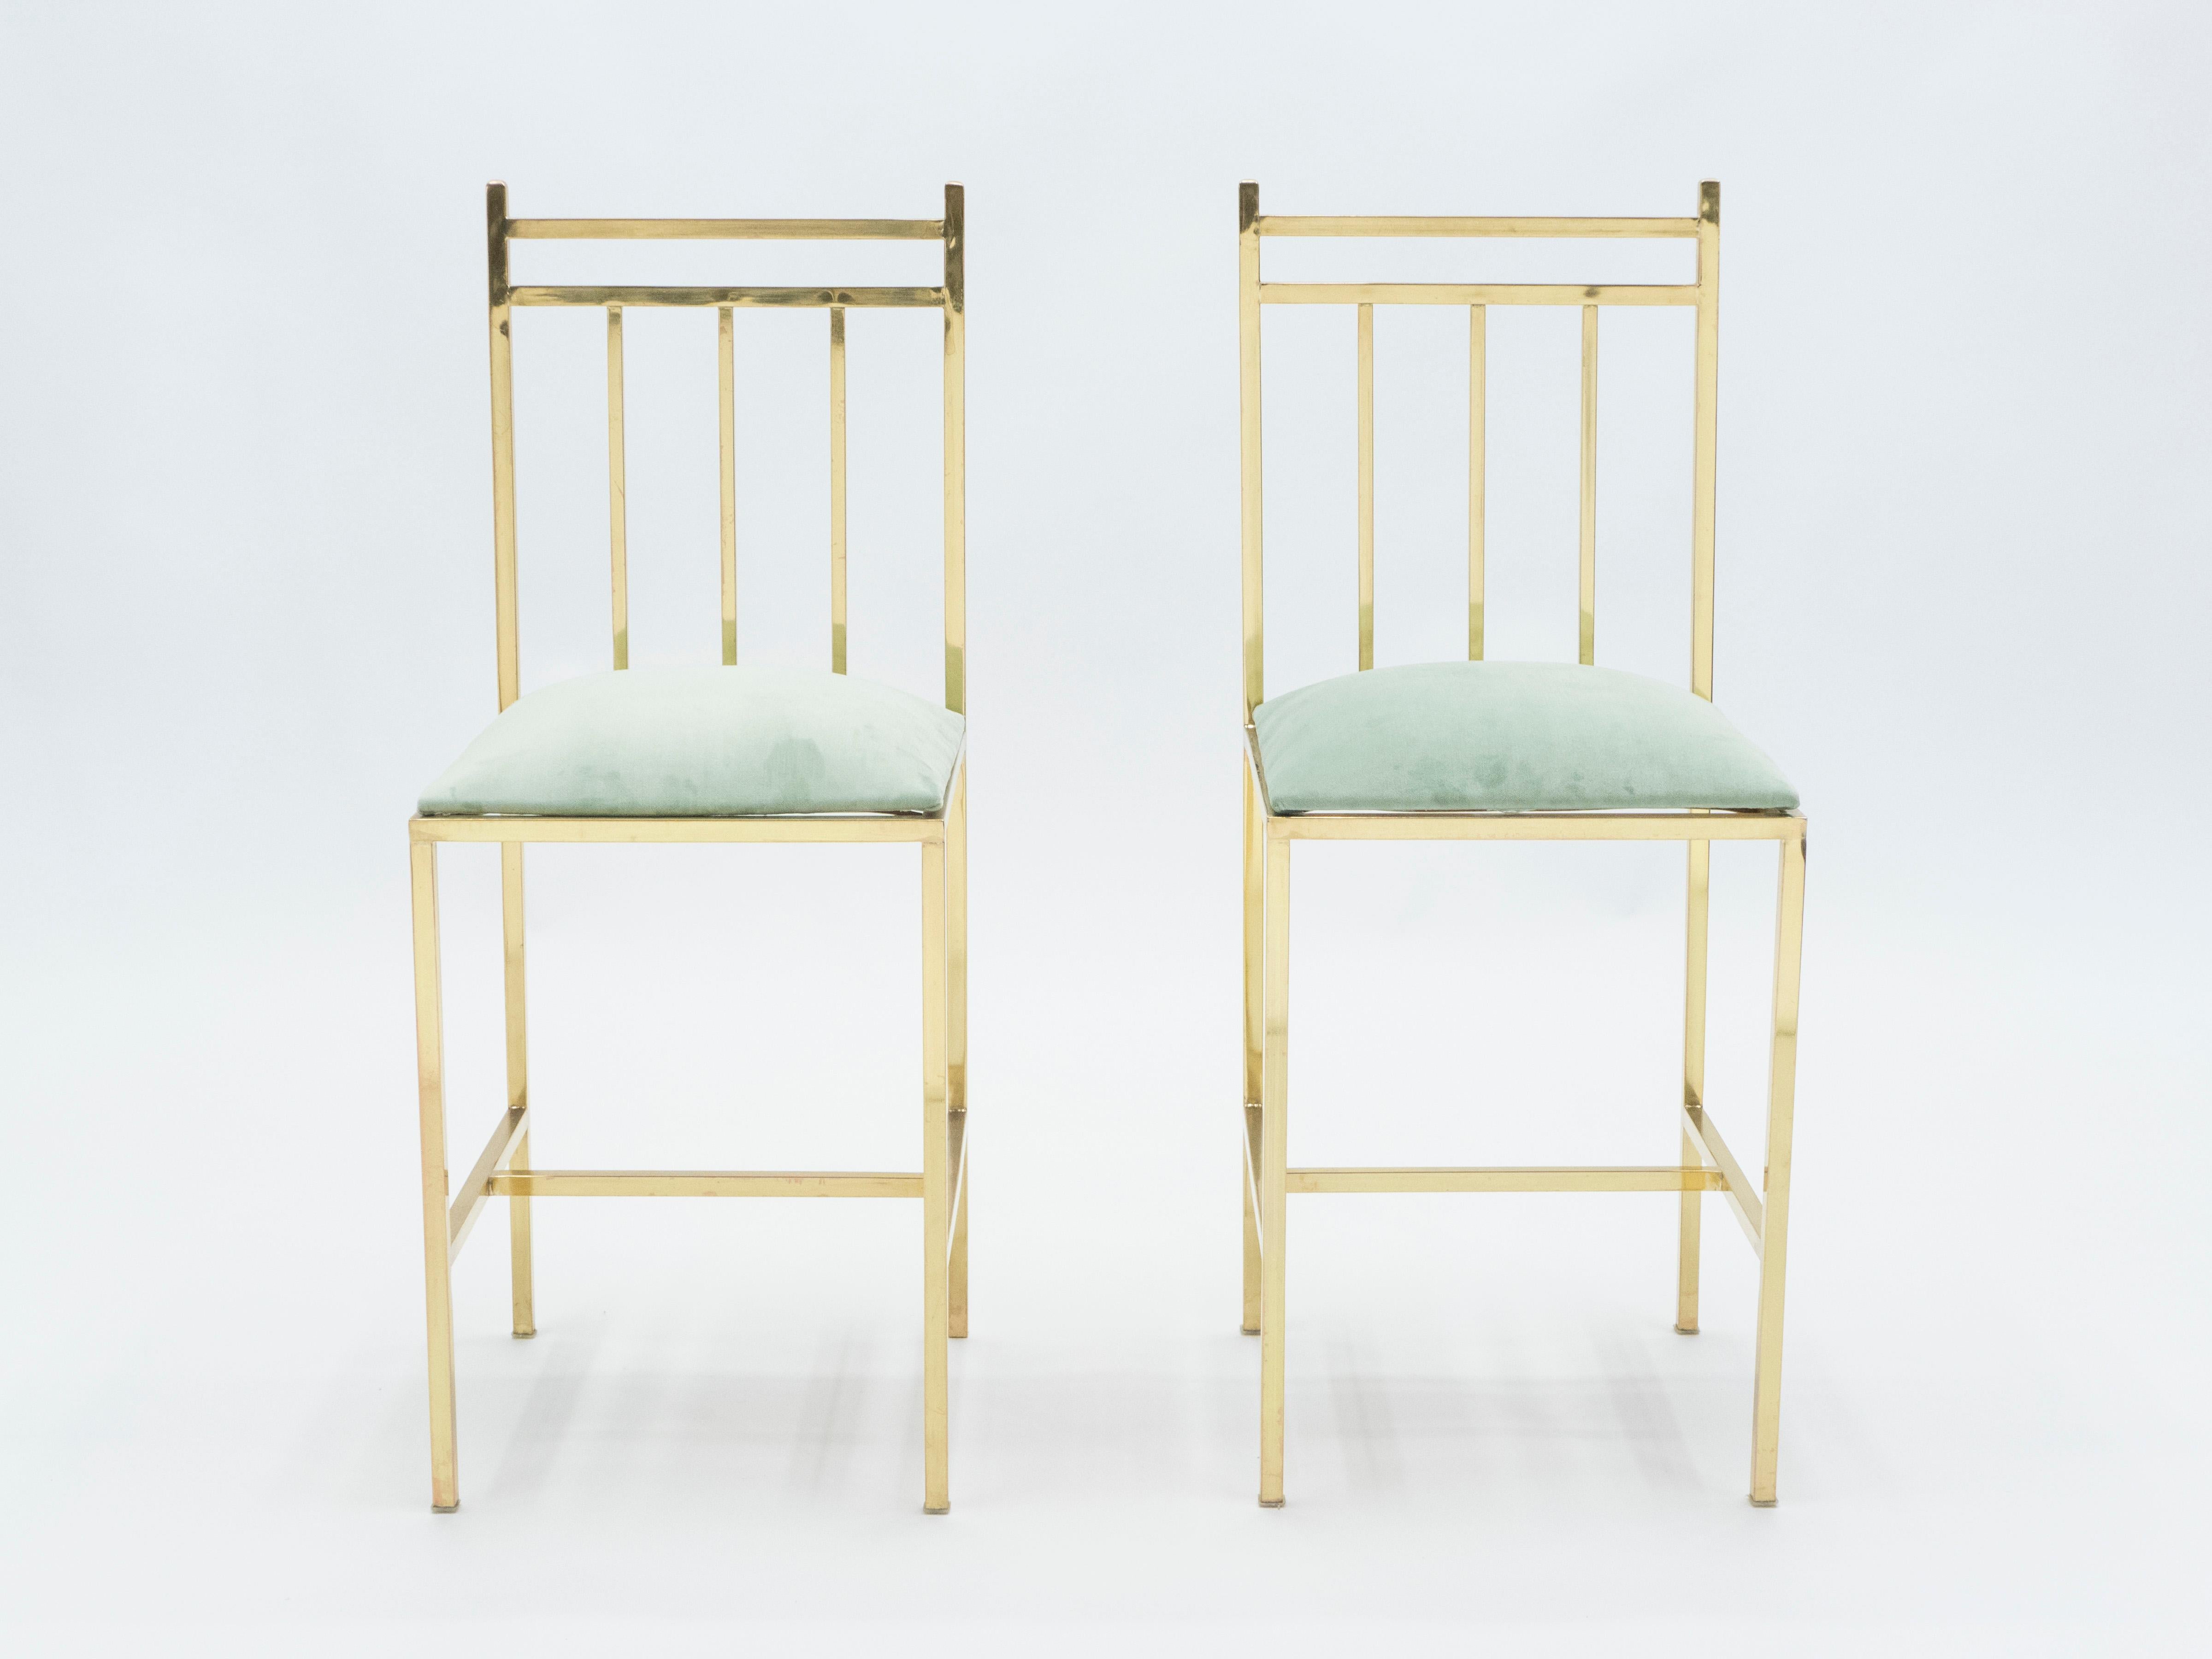 Mid-20th Century Rare Pair of Brass Child's Chairs Attributed to Marc Du Plantier, 1960s For Sale